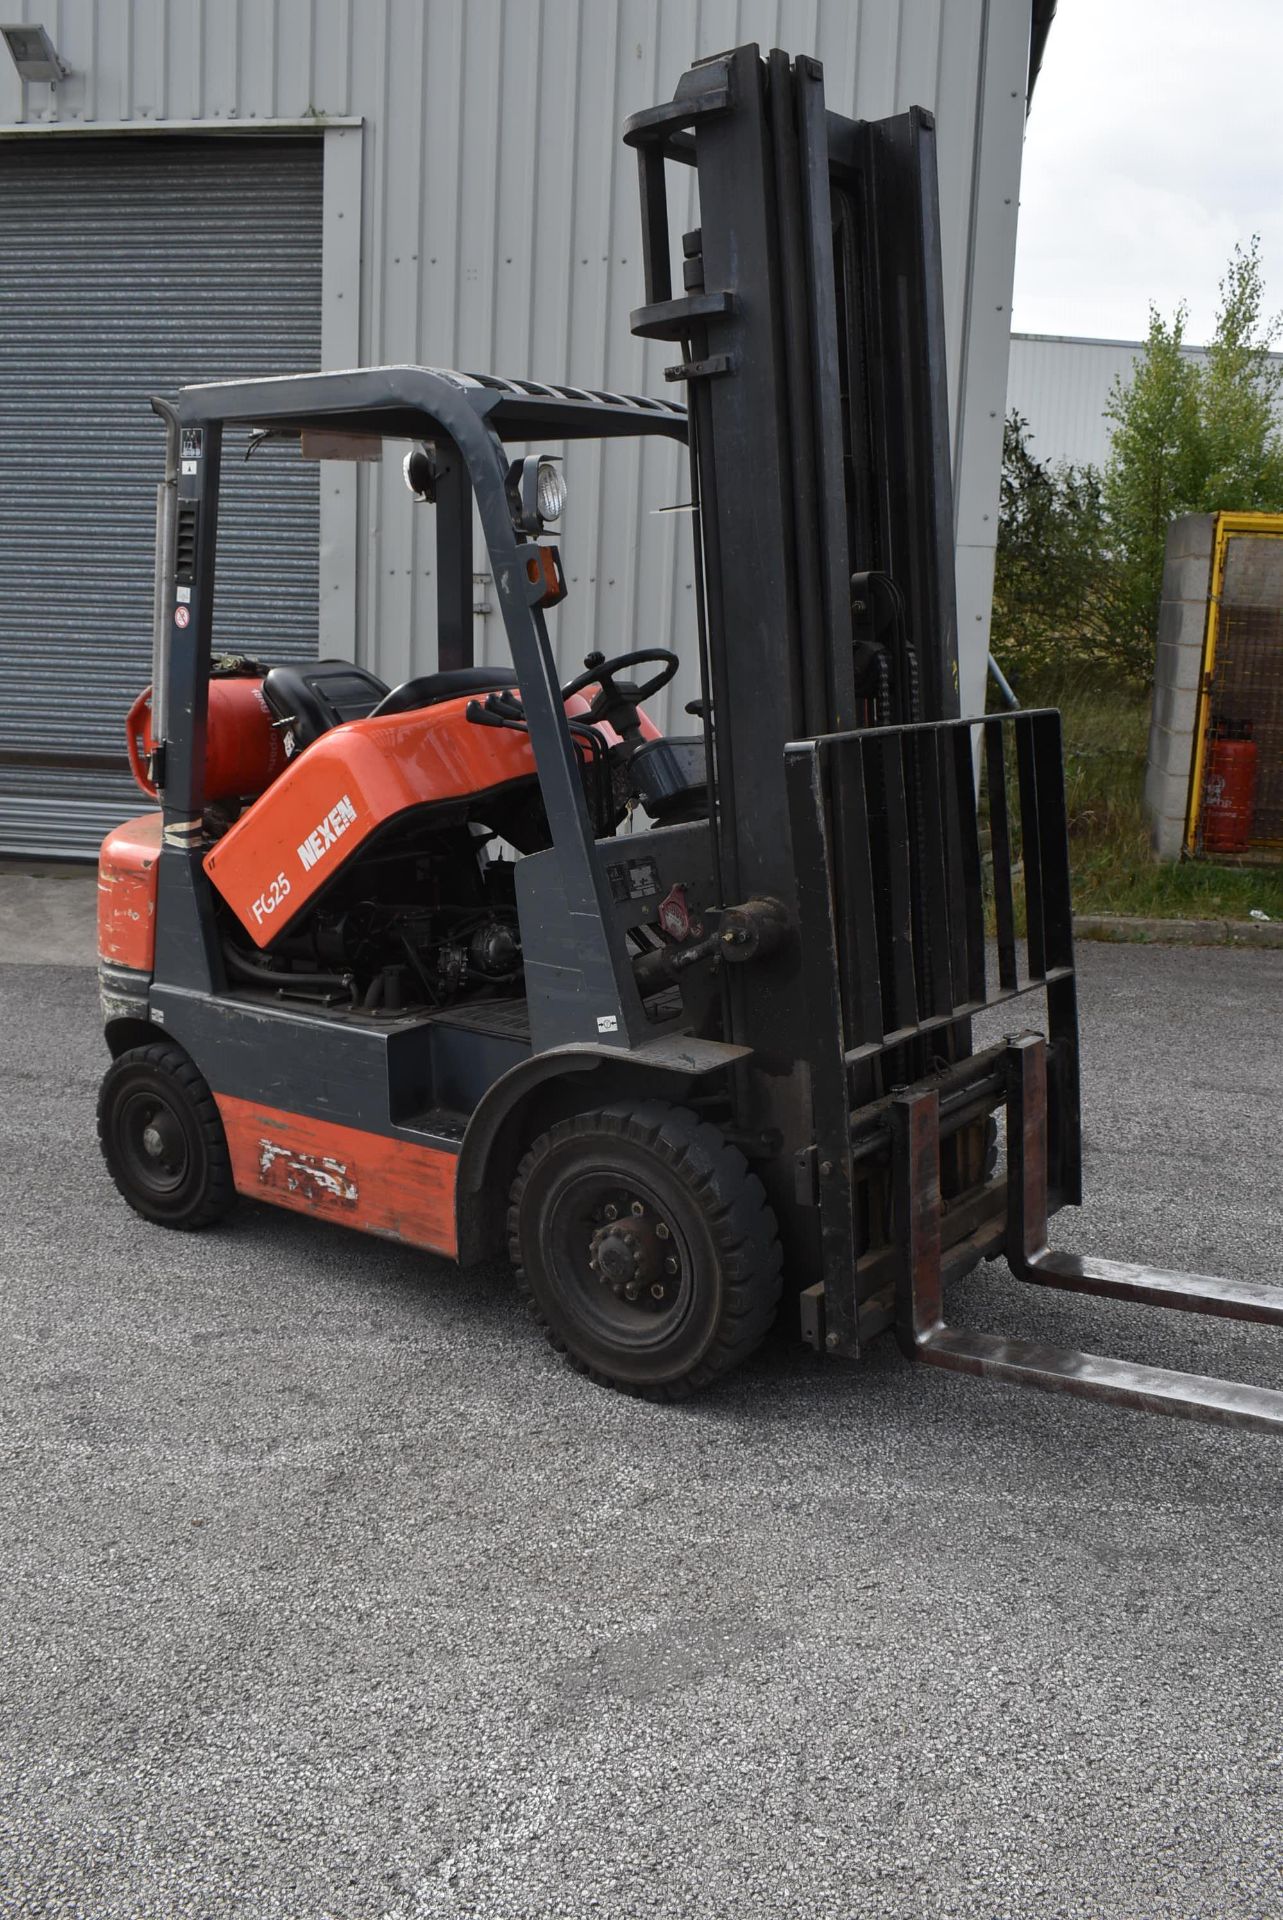 *Nexen FG25 Gas Forklift 5925.7 Hours (collection by appointment) - Image 8 of 8